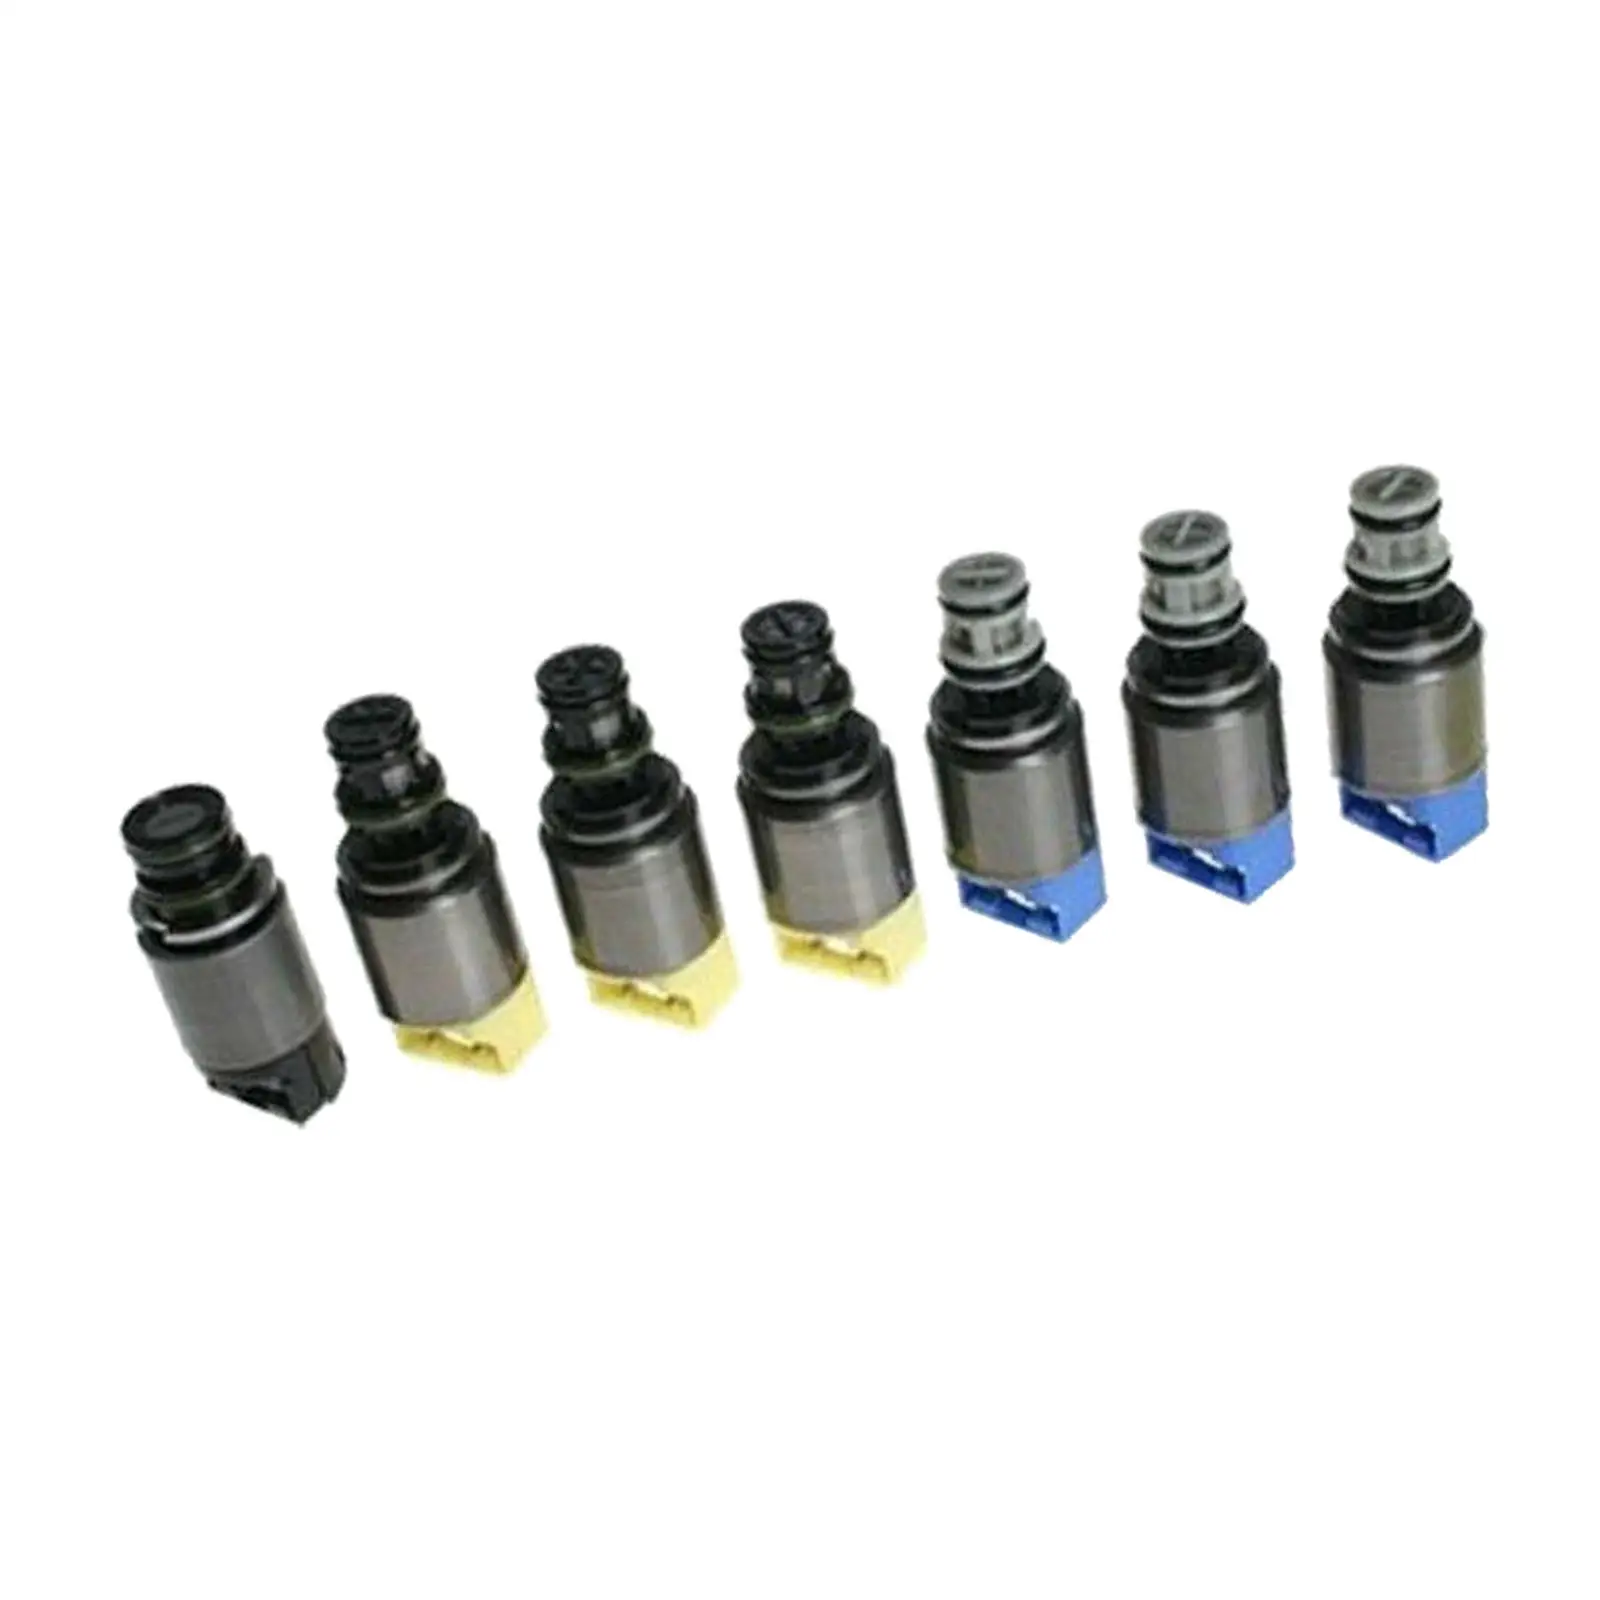 7x Transmission Solenoid Valves Kit Replacement Accessories 6HP19 Zf6HP26 Zf6HP for Ford Models